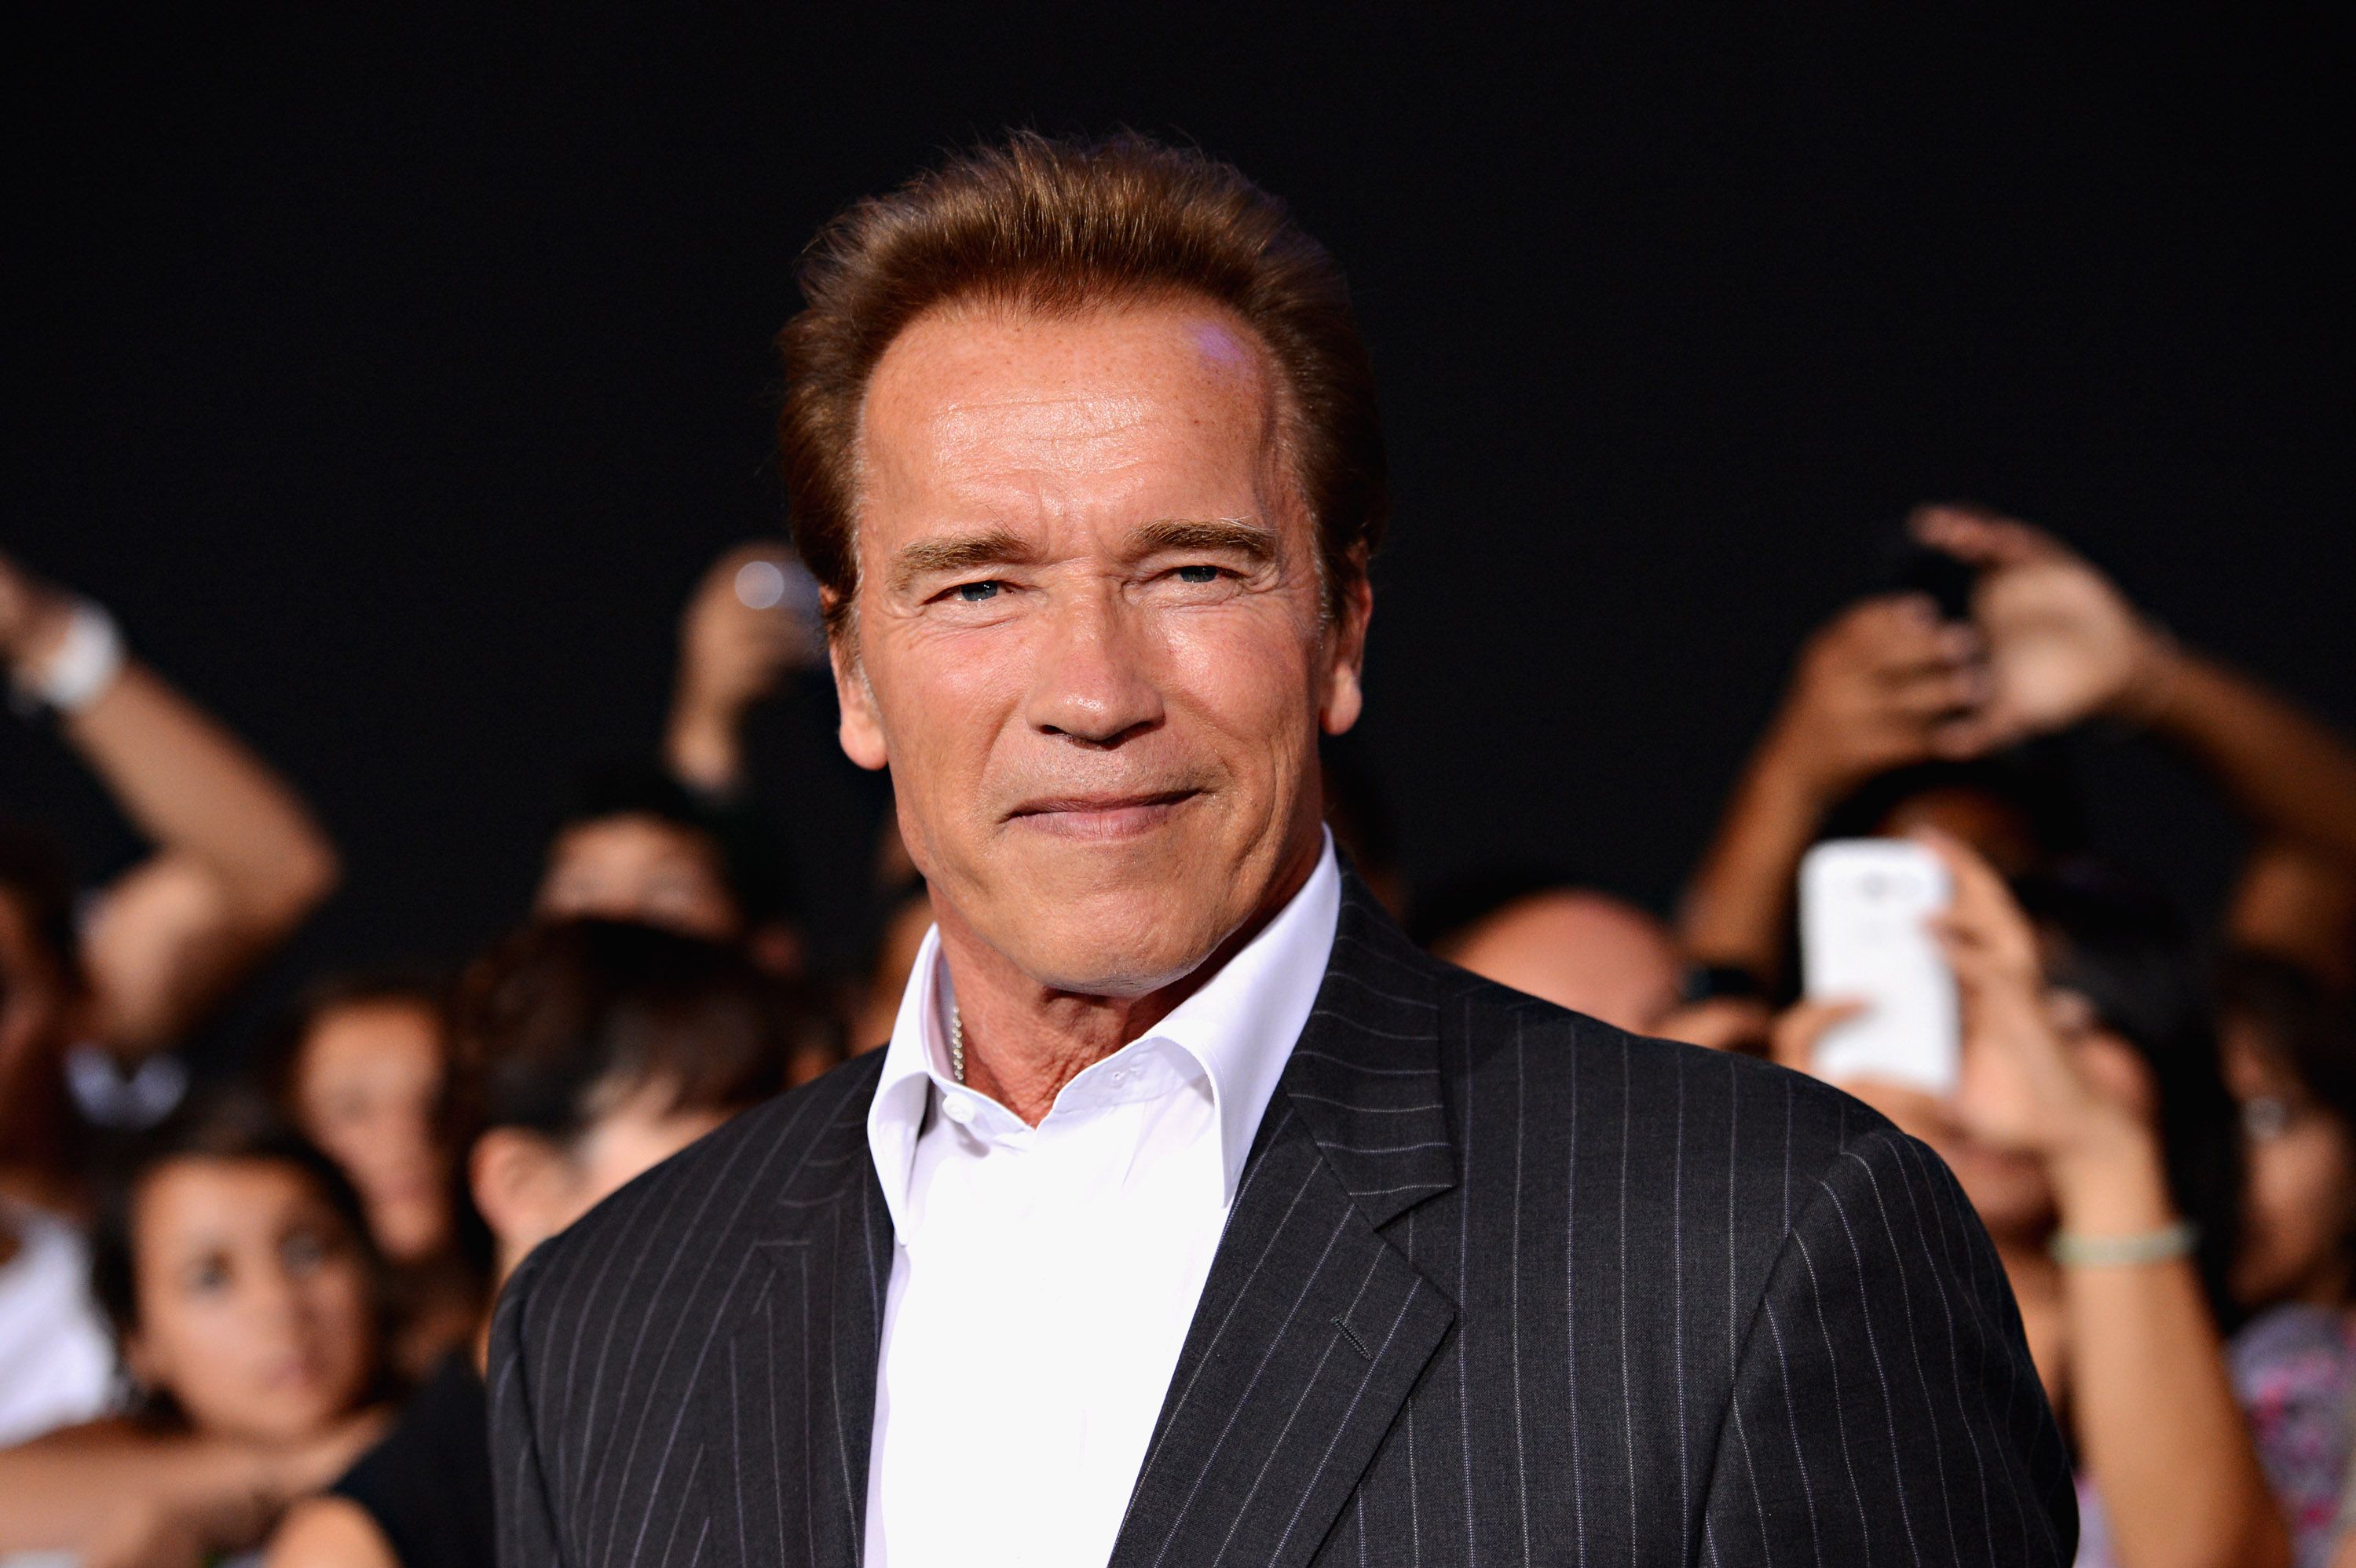 Actor Arnold Schwarzenegger at Lionsgate Films' "The Expendables 2" premiere in Hollywood, California | Photo: Jason Merritt/Getty Images